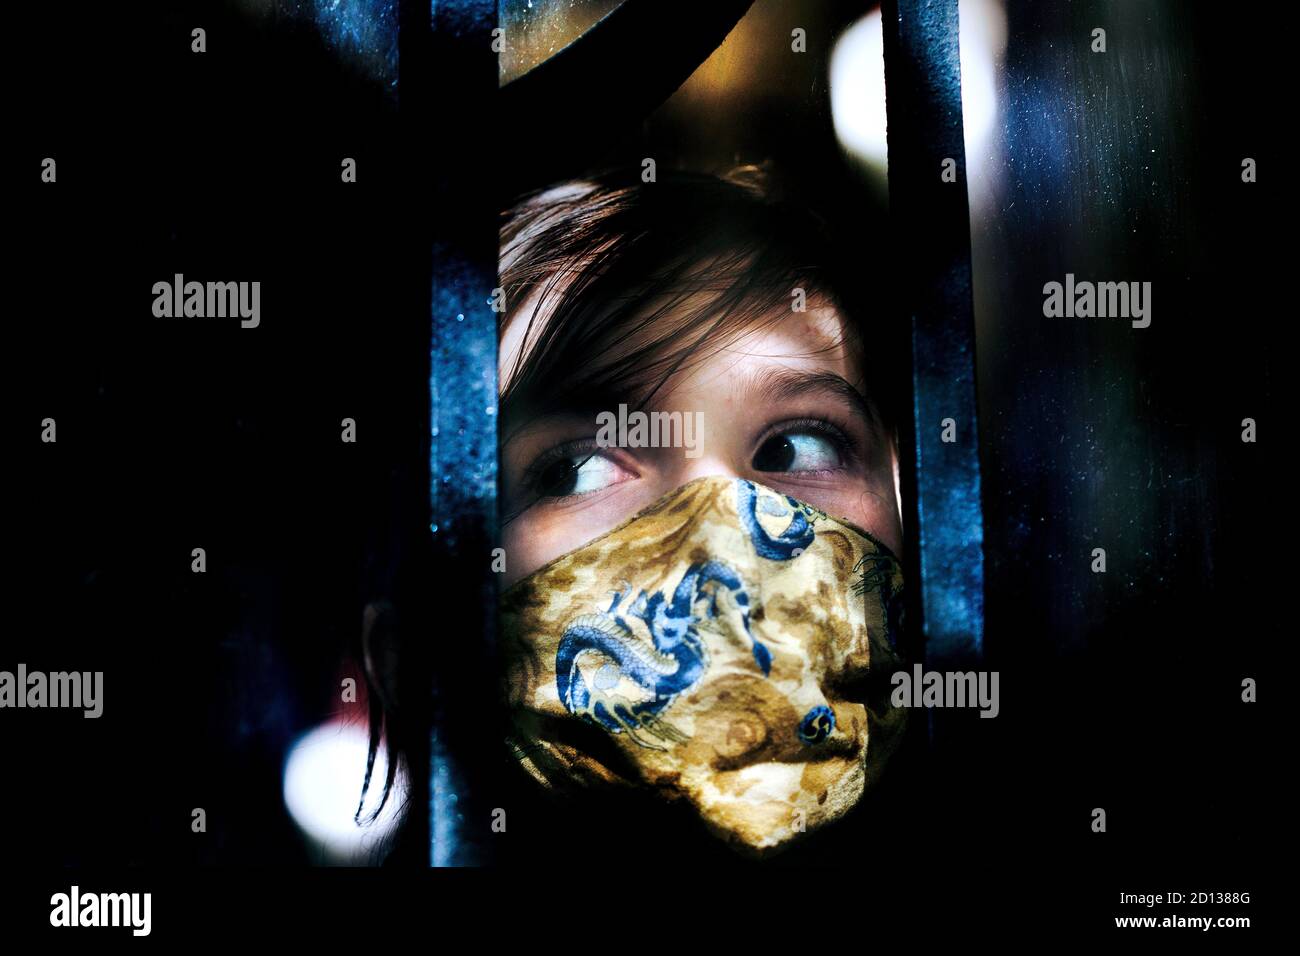 11 year-old boy wearing face mask / covering. Stock Photo